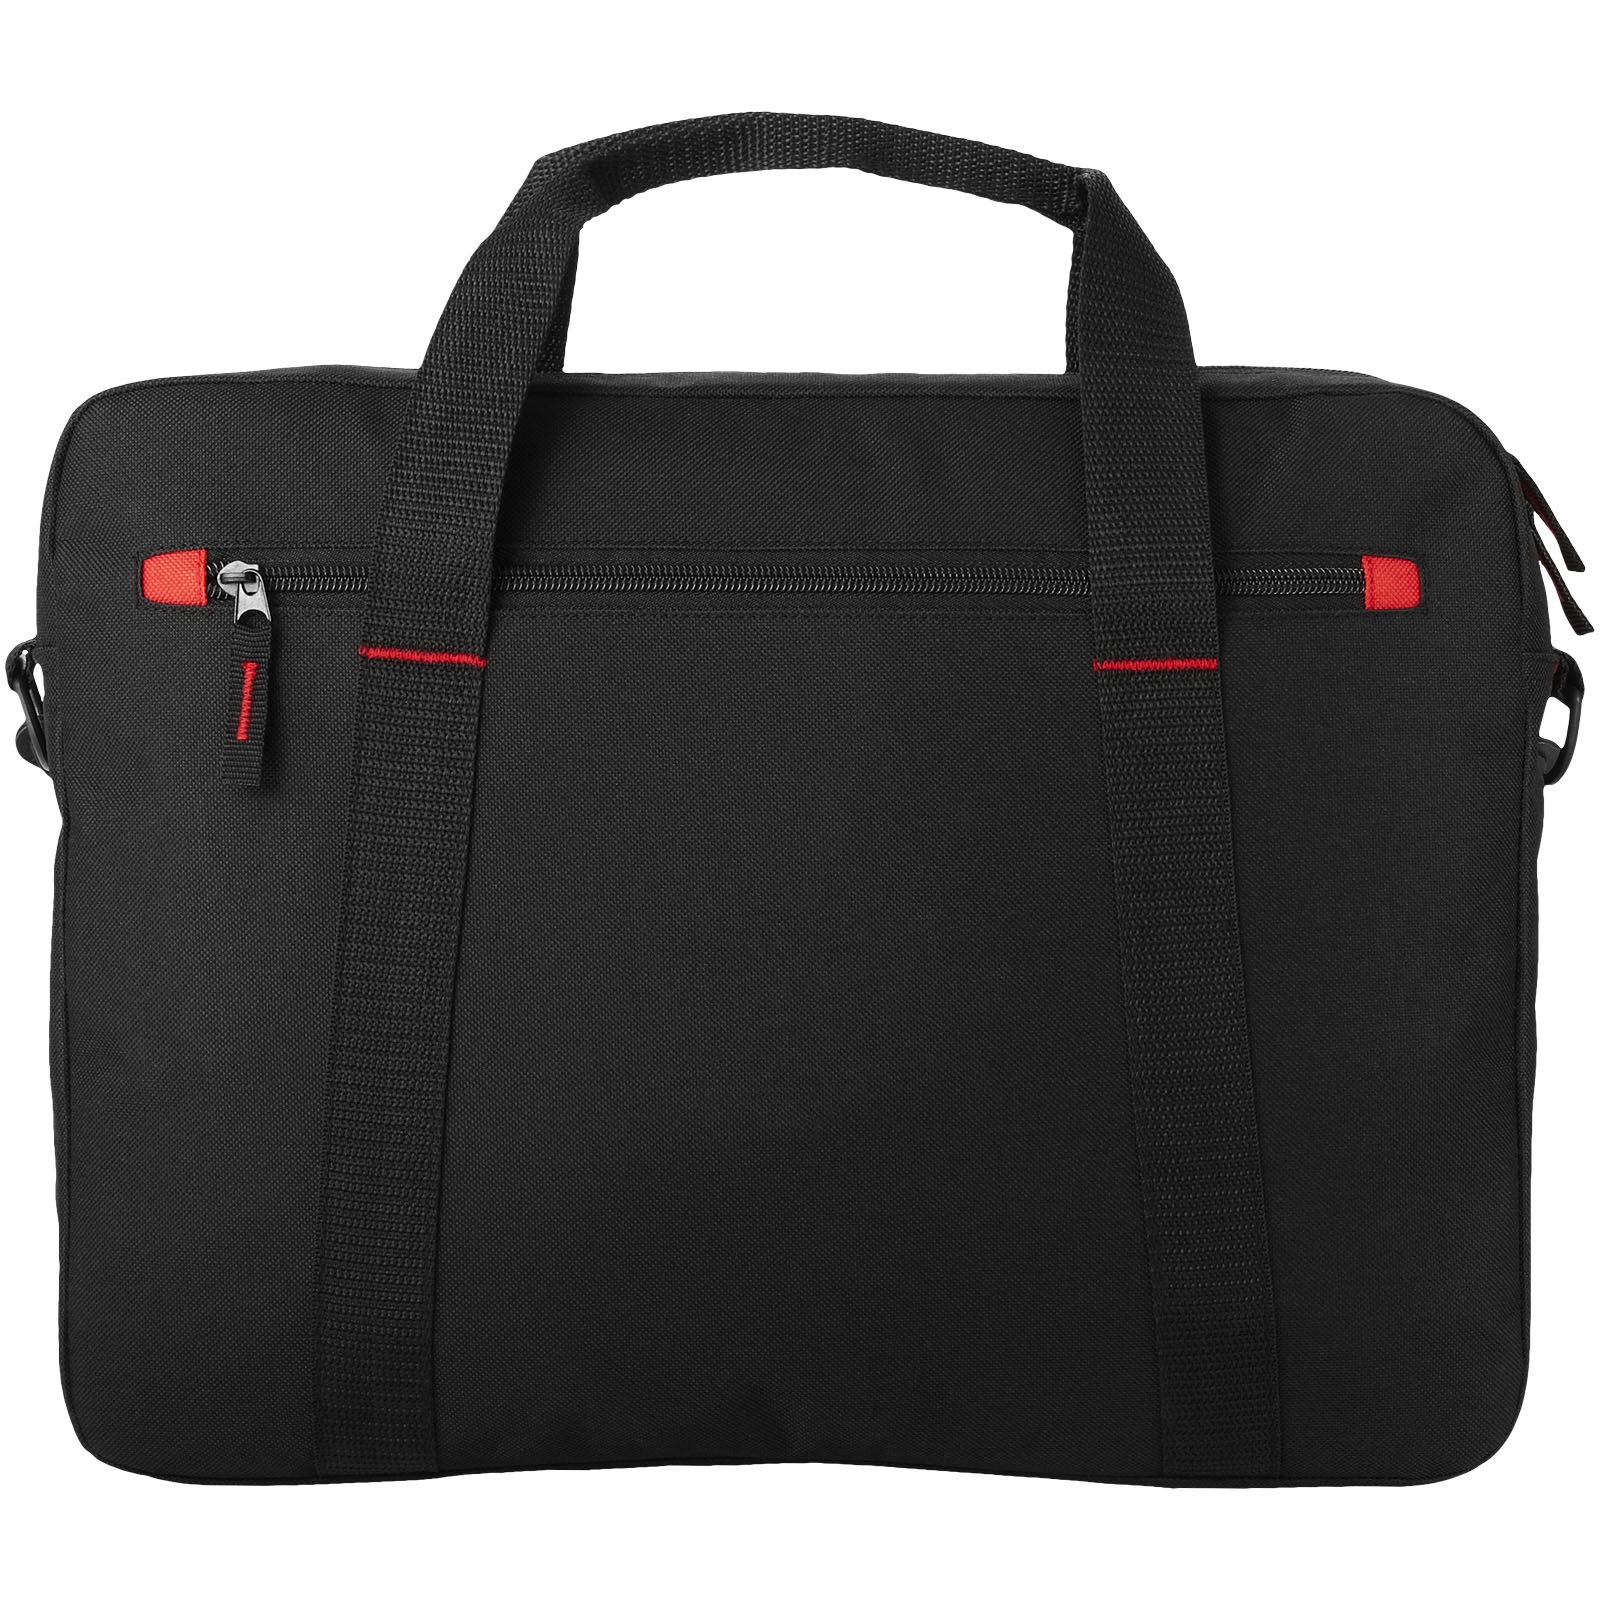 Advertising Laptop & Tablet bags - Vancouver 15.4